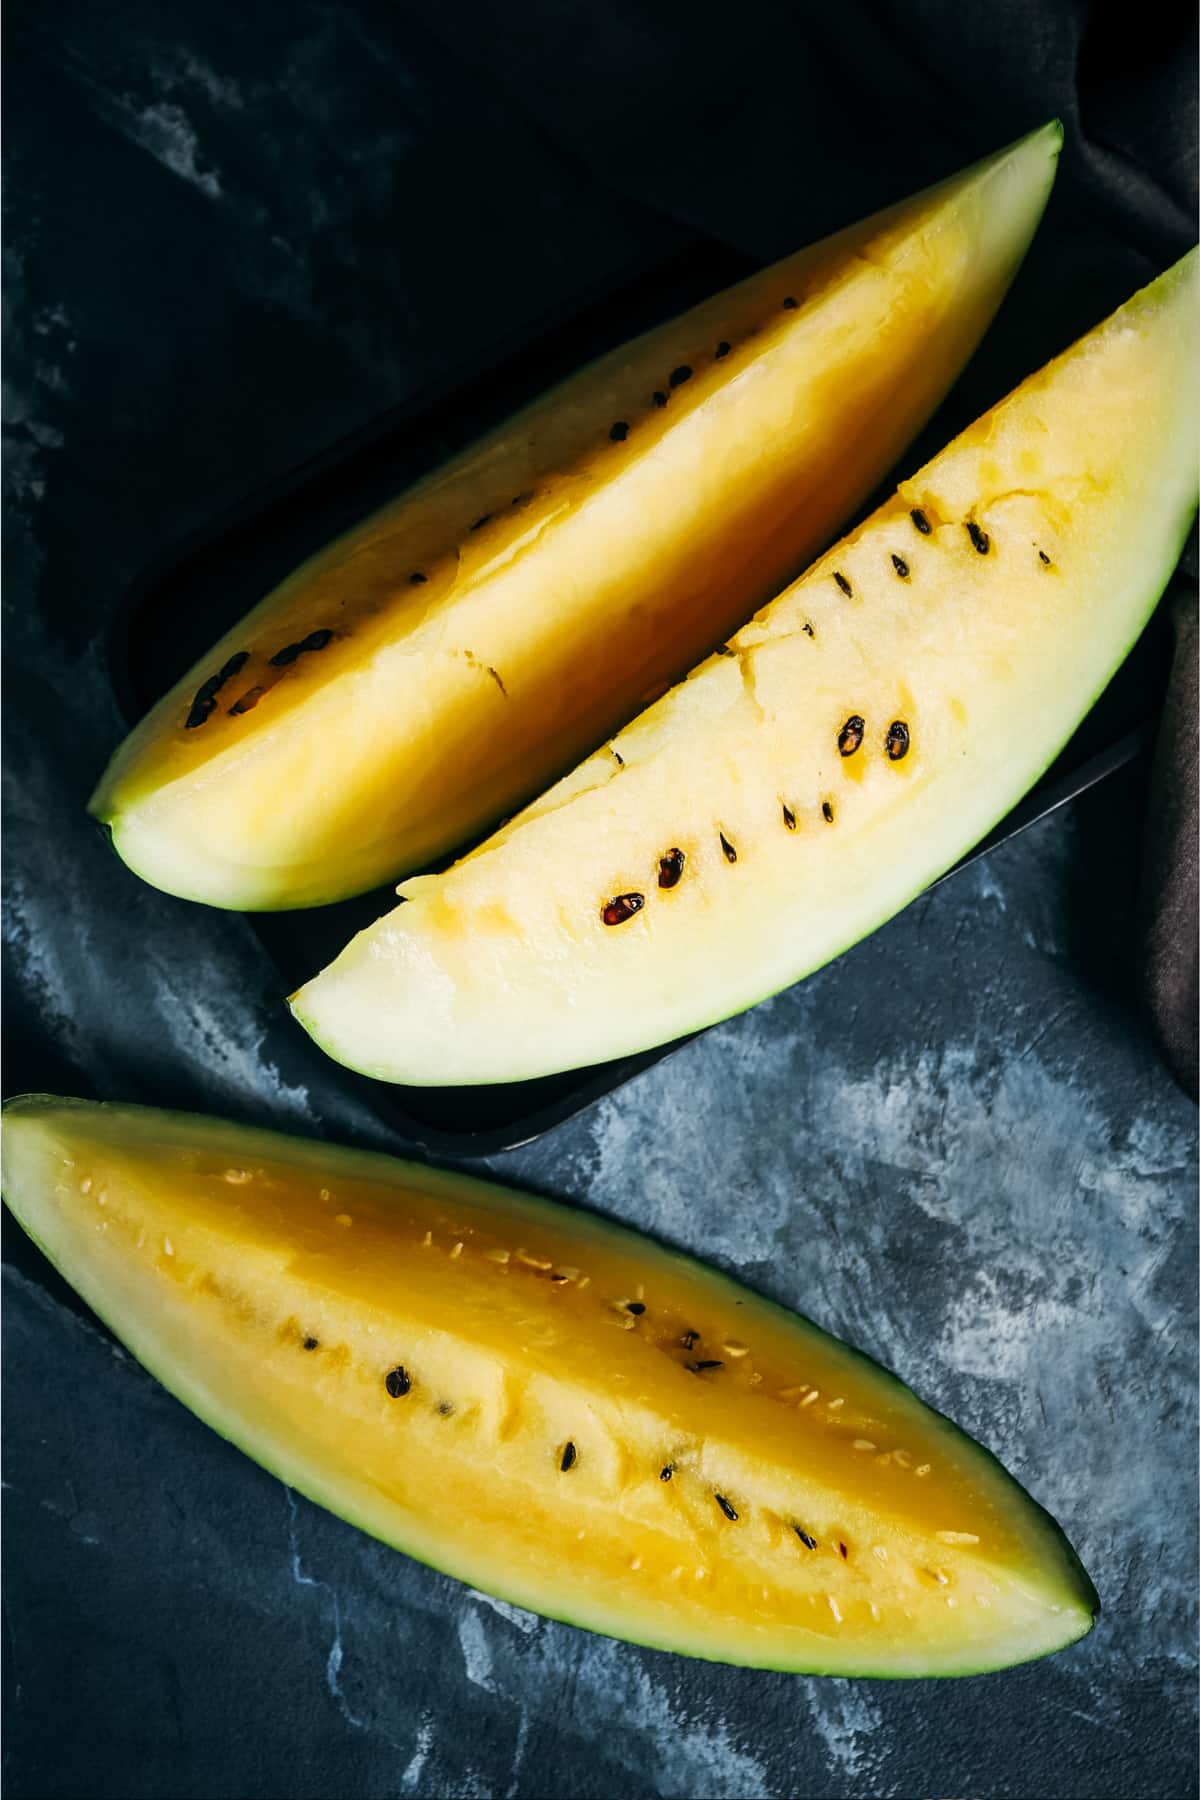 Three large wedges of bright yellow watermelon.